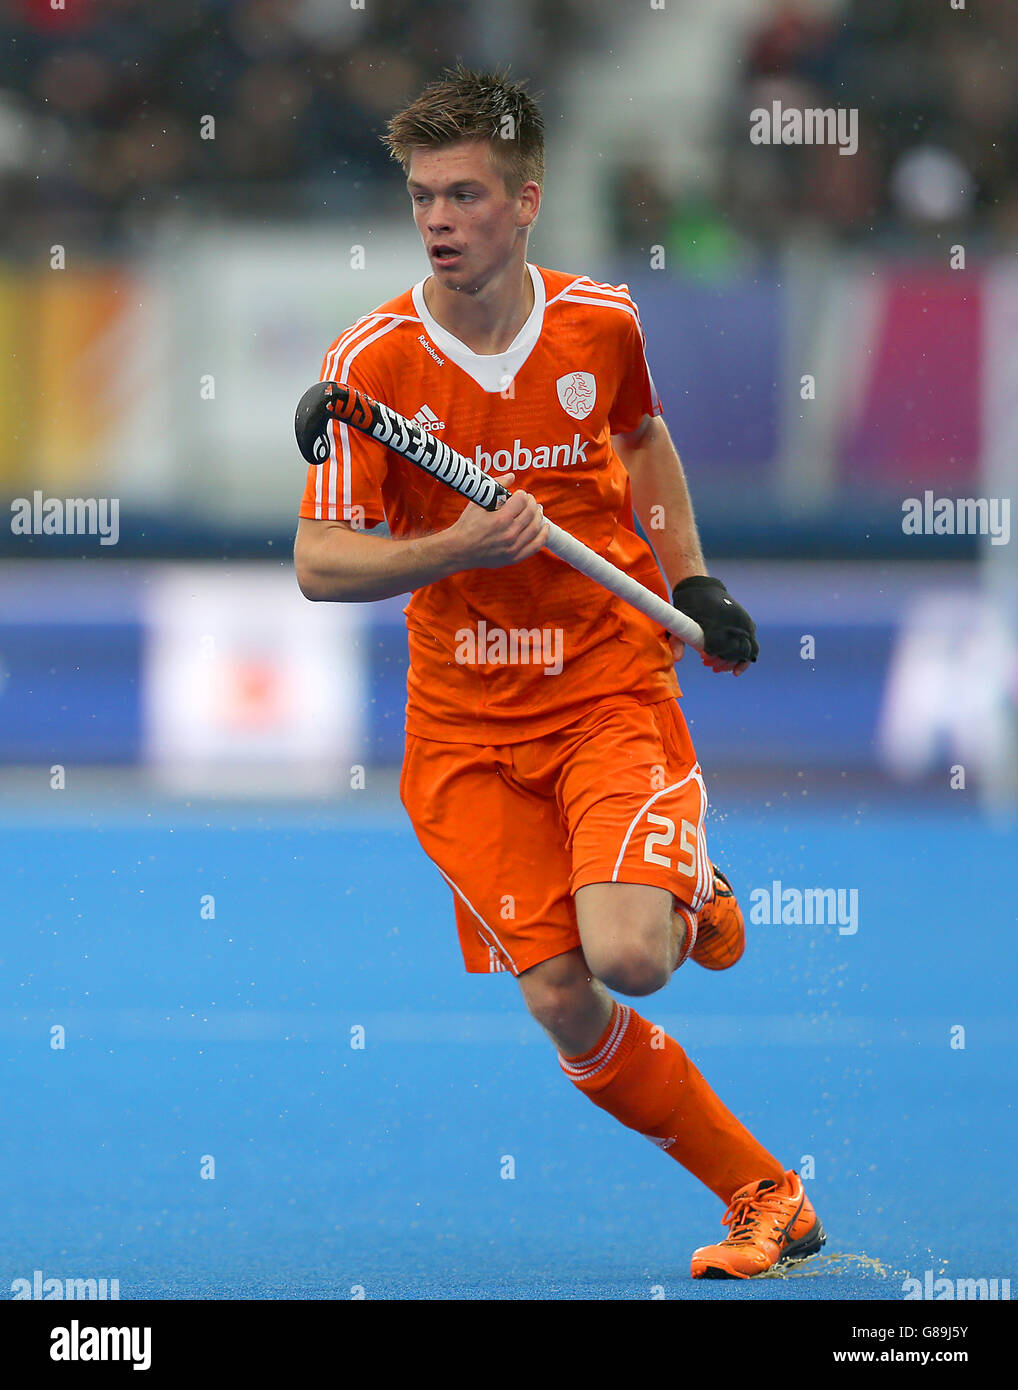 Hockey 2015 Unibet Euro Hockey Championships - Gold Medal Match - Netherlands v Germany - Lee Valley Hockey and Tennis Centre. Netherland's Thierry Brinkman during the Bronze Medal match at the Lee Valley Hockey and Tennis Centre, London. Stock Photo